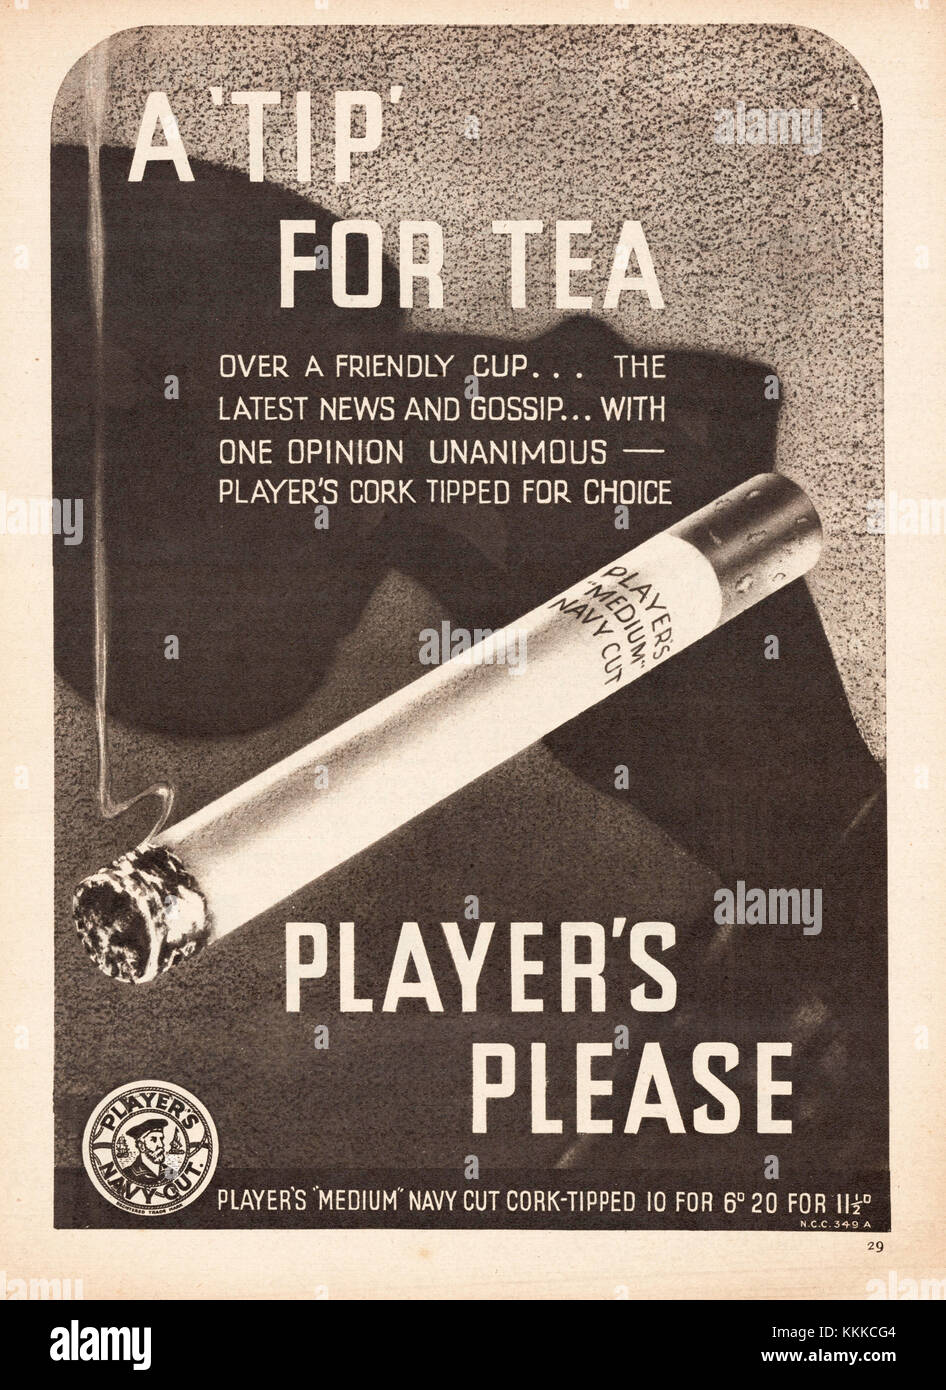 Player's Please Cigarettes Solid-Faced Canvas Print